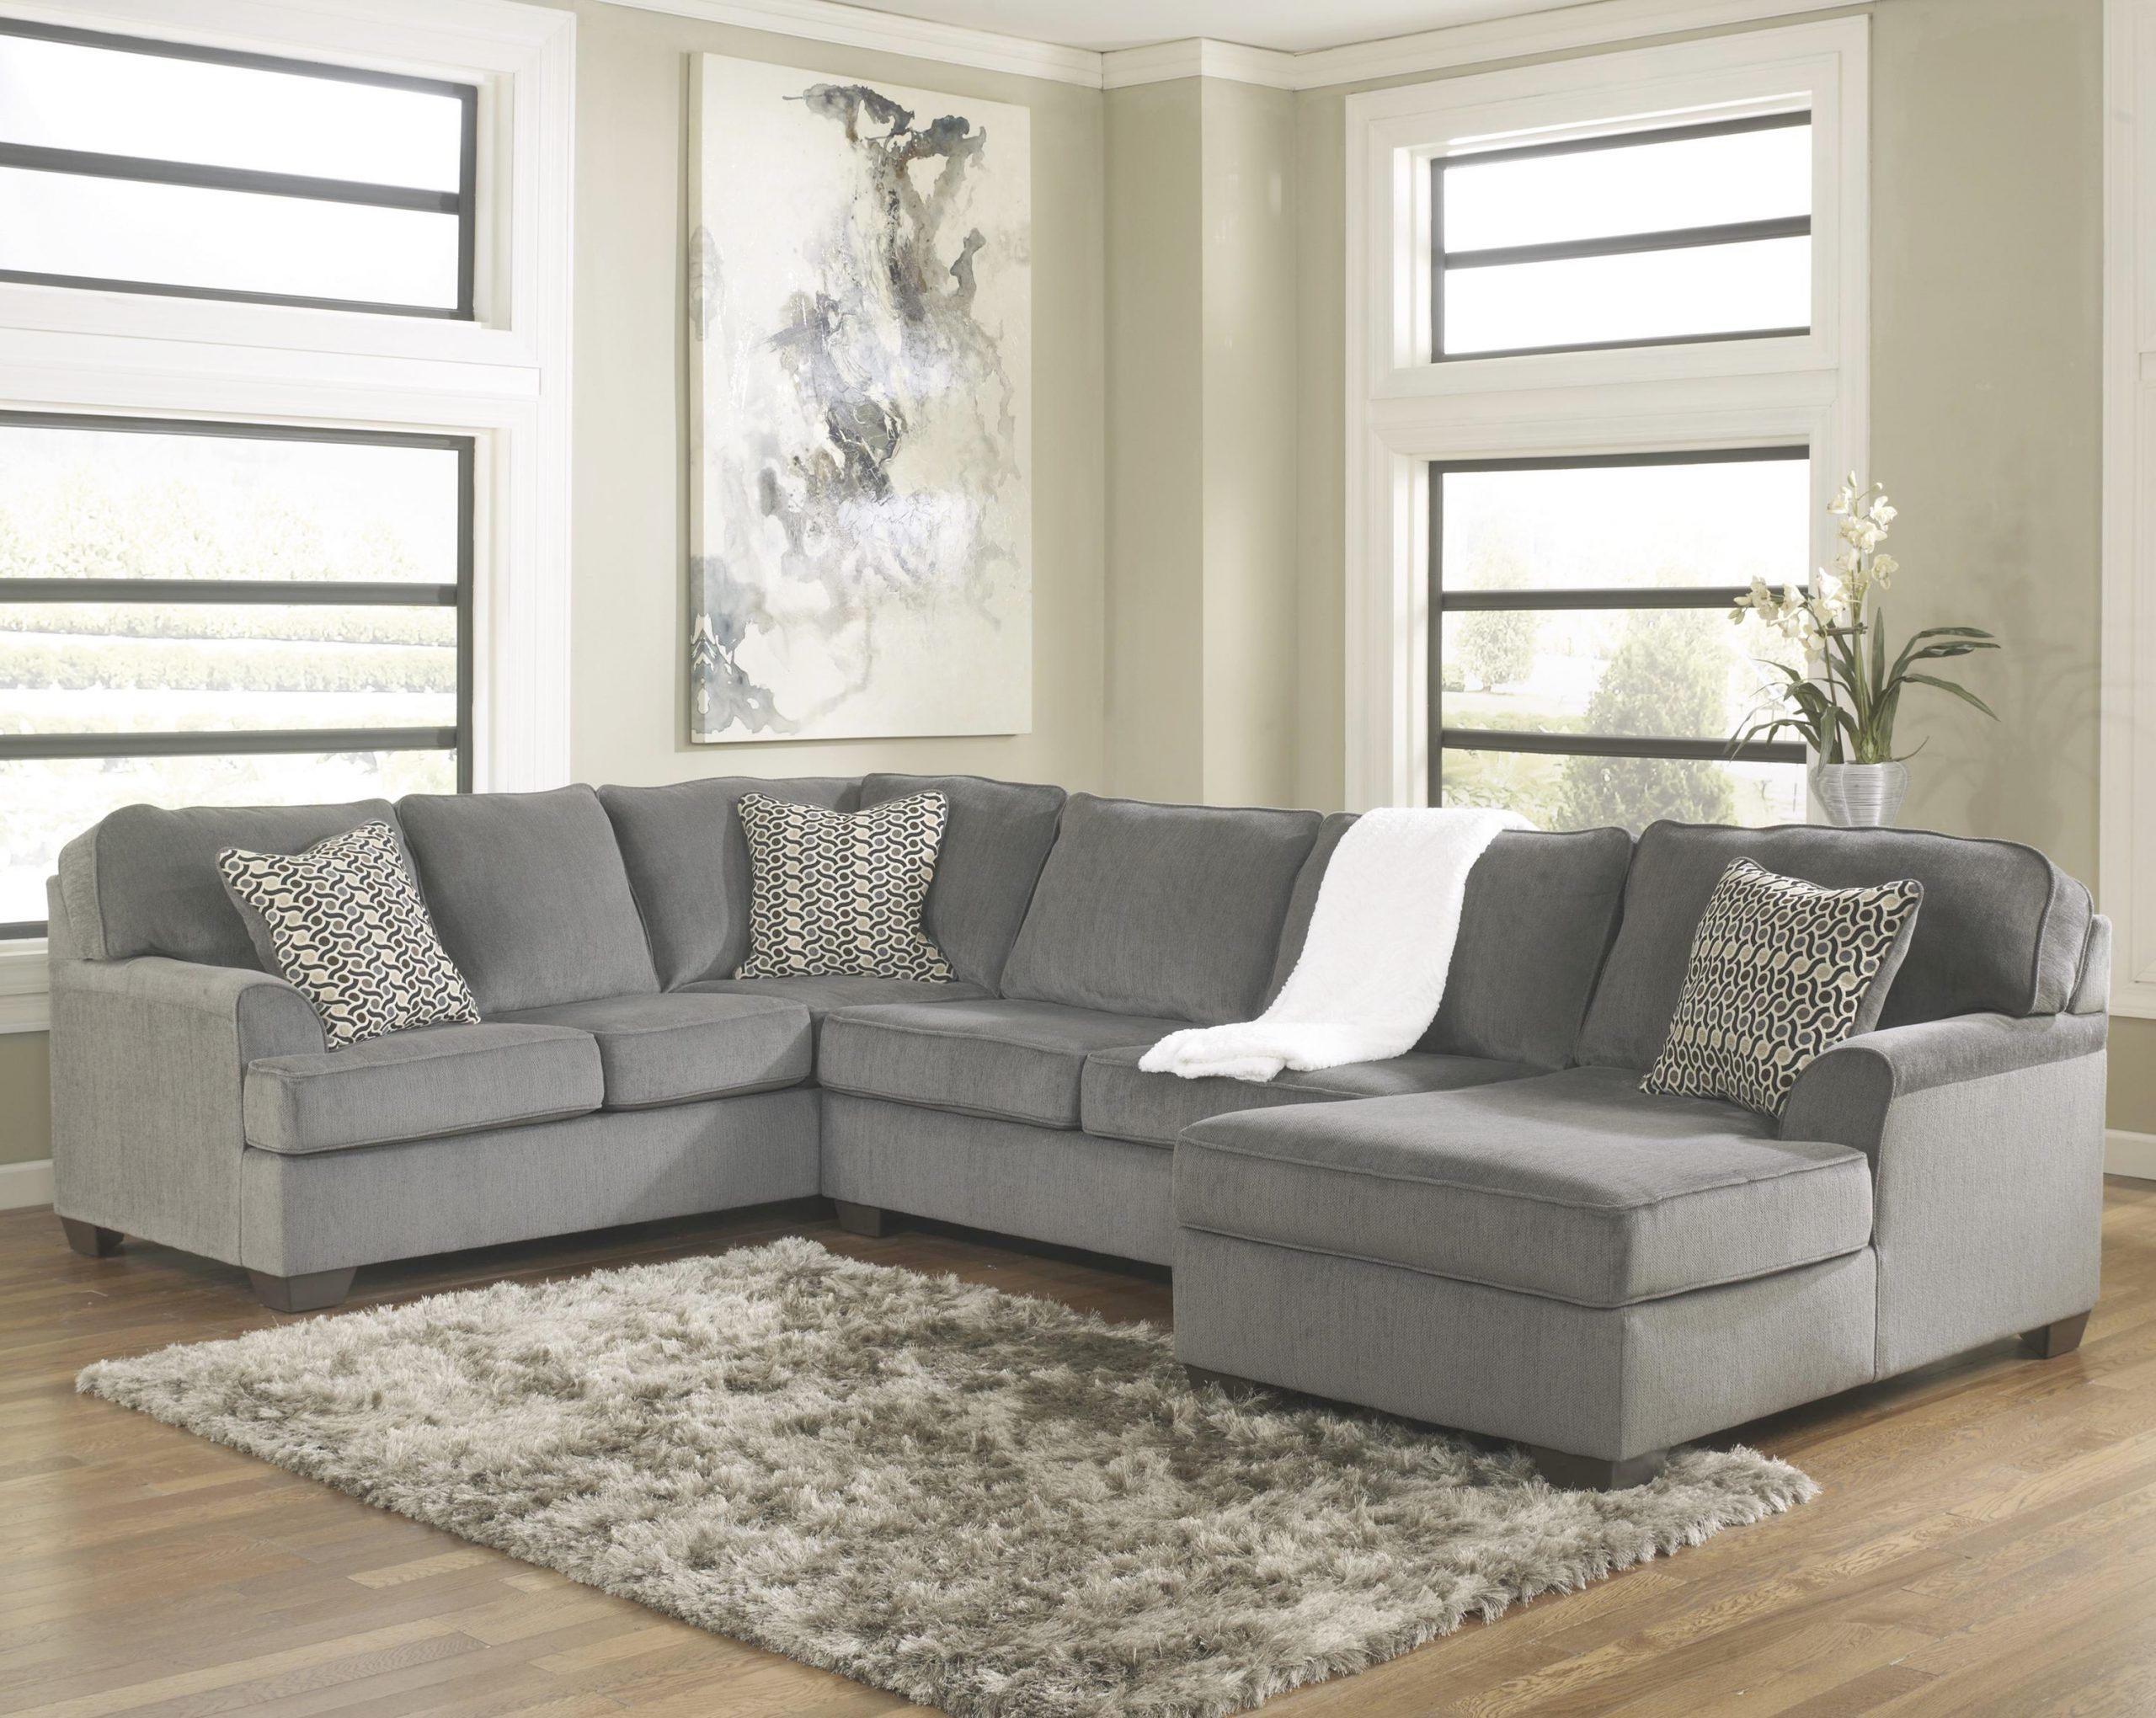 Ashley Furniture Loric – Smoke Contemporary 3 Piece Sectional With For Green Bay Wi Sectional Sofas (Photo 5 of 10)